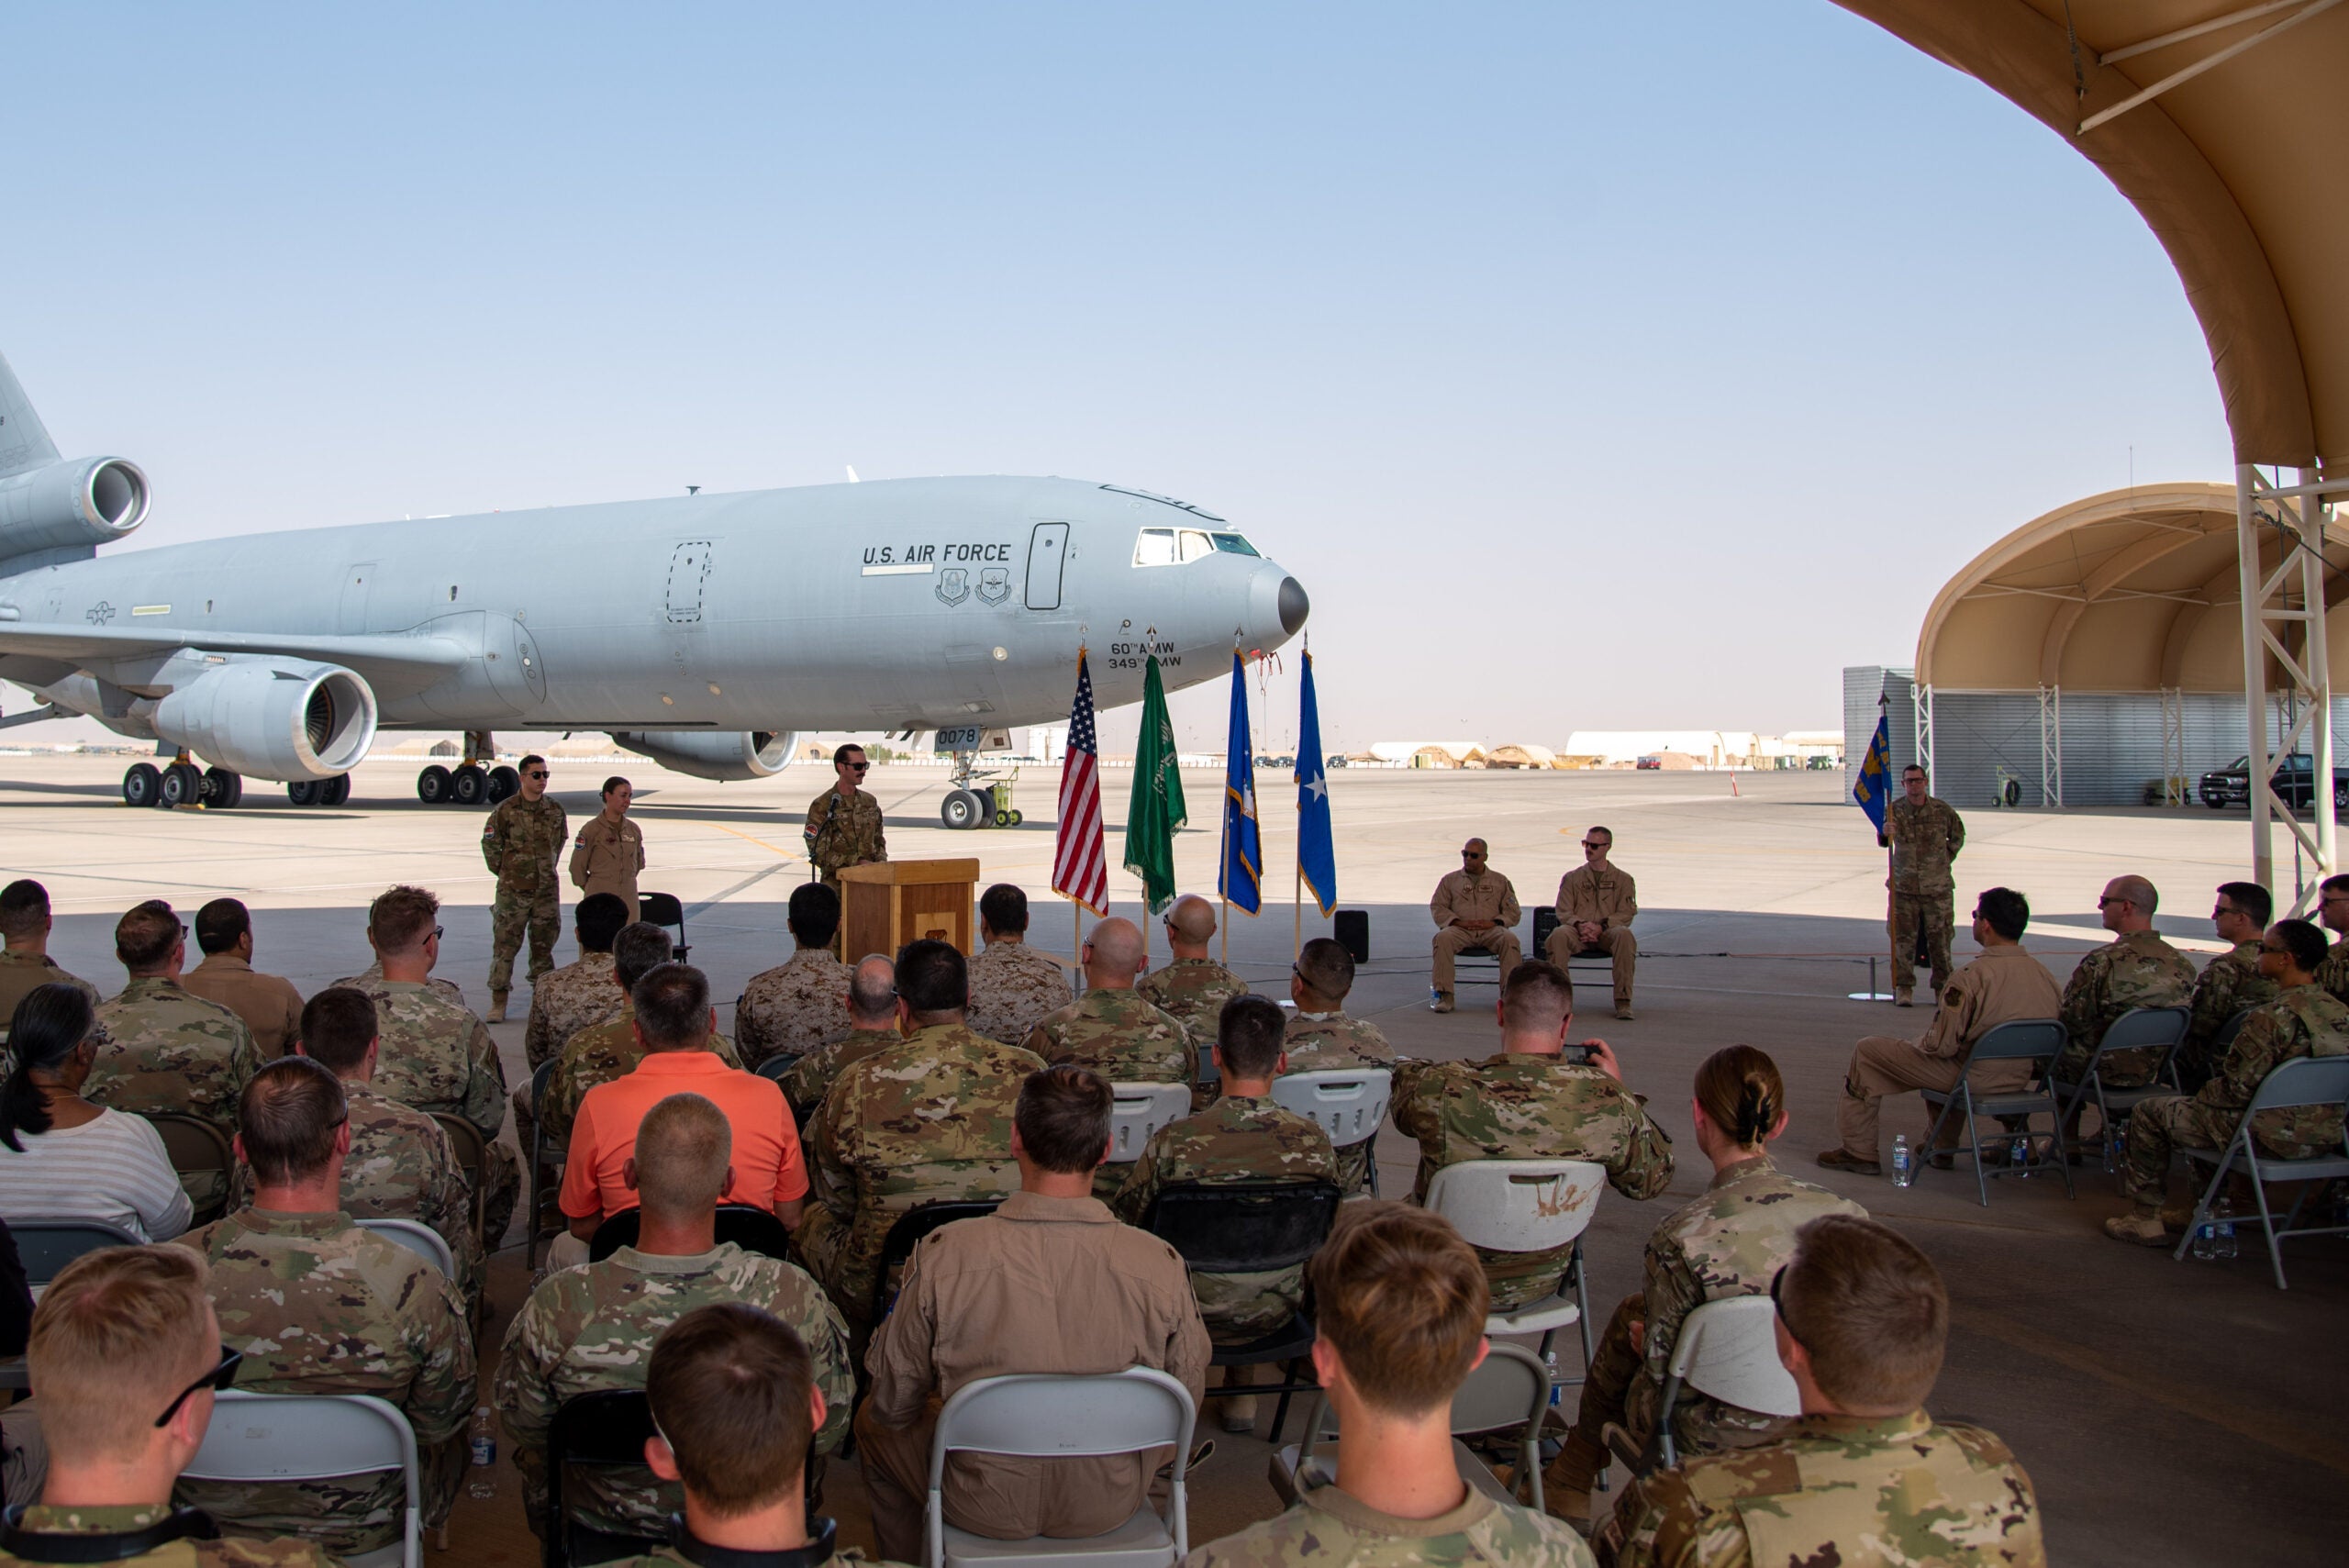 U.S. Airmen from the 378th Air Expeditionary Wing gather for the 908th Expeditionary Air Refueling Squadron's inactivation ceremony at Prince Sultan Air Base, Kingdom of Saudi Arabia, Oct. 4, 2023. The ceremony highlighted the legacy of the KC-10 after over 30 years of service within the U.S. Air Forces Central (AFCENT) Area of Responsibility. By September 2024, the U.S. Air Force's fleet of KC-10s will be decommissioned and gradually replaced by the KC-46 aircraft. (U.S. Air Force photo by Tech. Sgt. Alexander Frank)